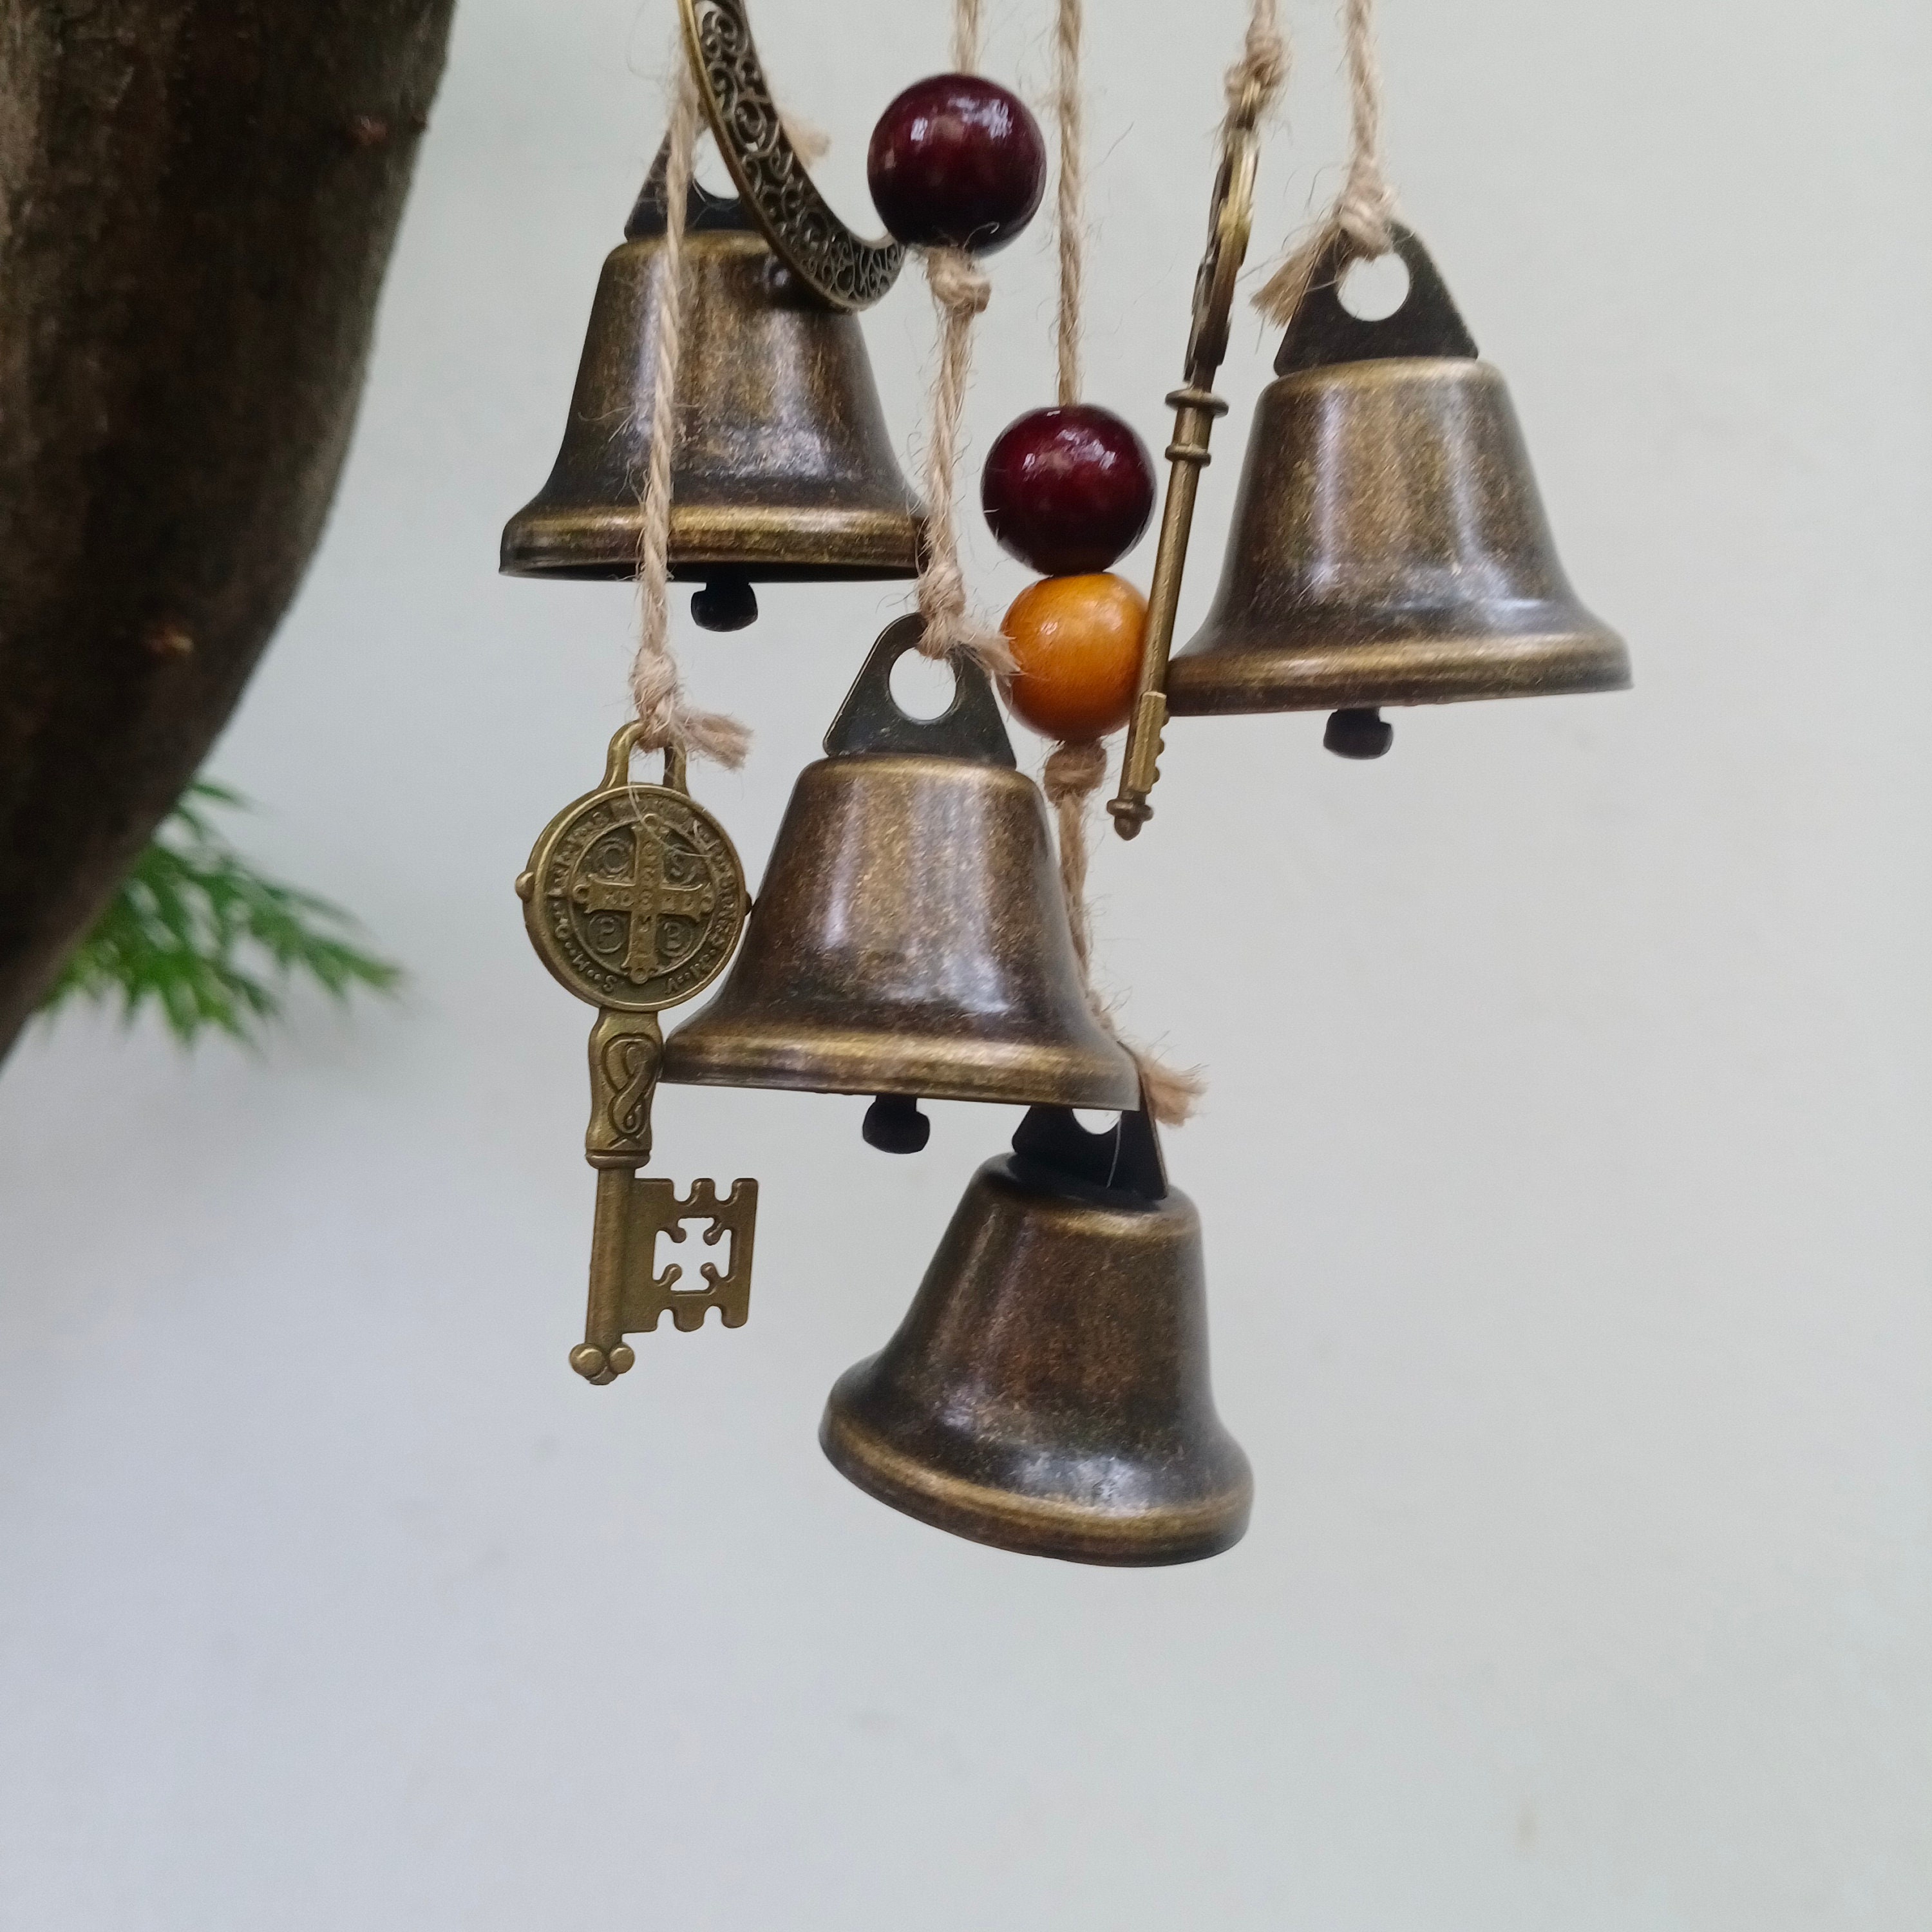 Witches Bells, Gothic House Warming, Witch Bells for Door Protection,  Witchy New Home Gift, Protection Charm, Alternative Housewarming Gift 